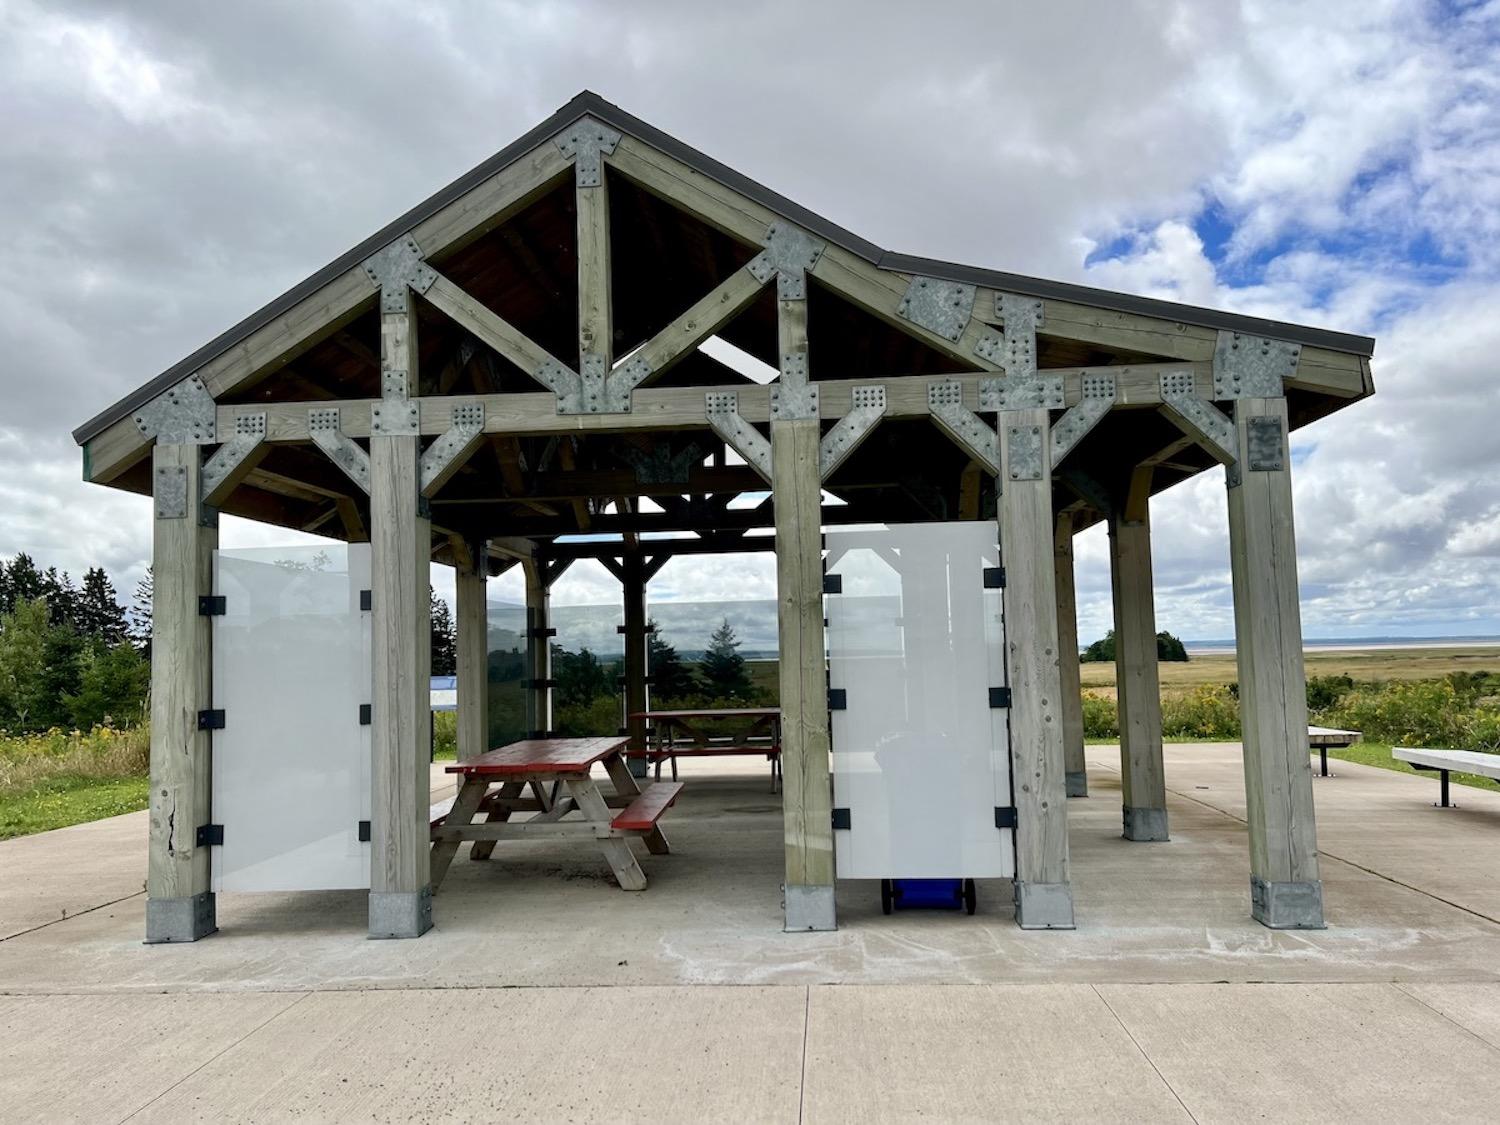 Even a simple picnic shelter can increase the draw of a national historic site.